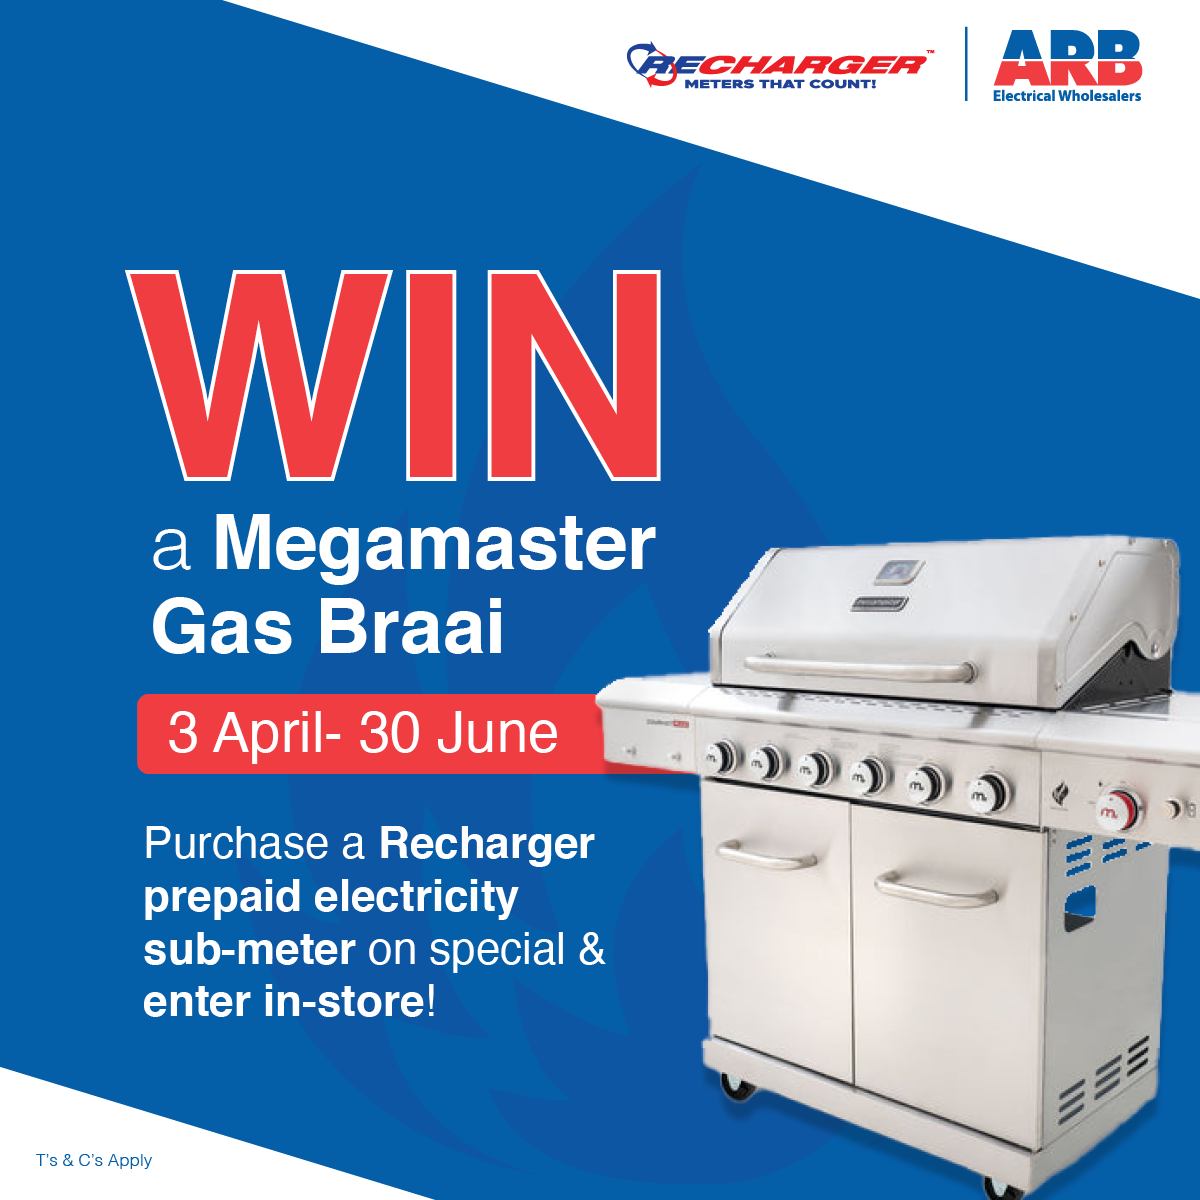 WIN a Megamaster Gas Braai! By buying any of these Recharger prepaid electricity sub-meters, which are available on special at any ARB branches, you can complete an entry form to participate.

T's and C's apply.

#Recharger #prepaidmeters #ARB #electricals #gasbraai #WIN